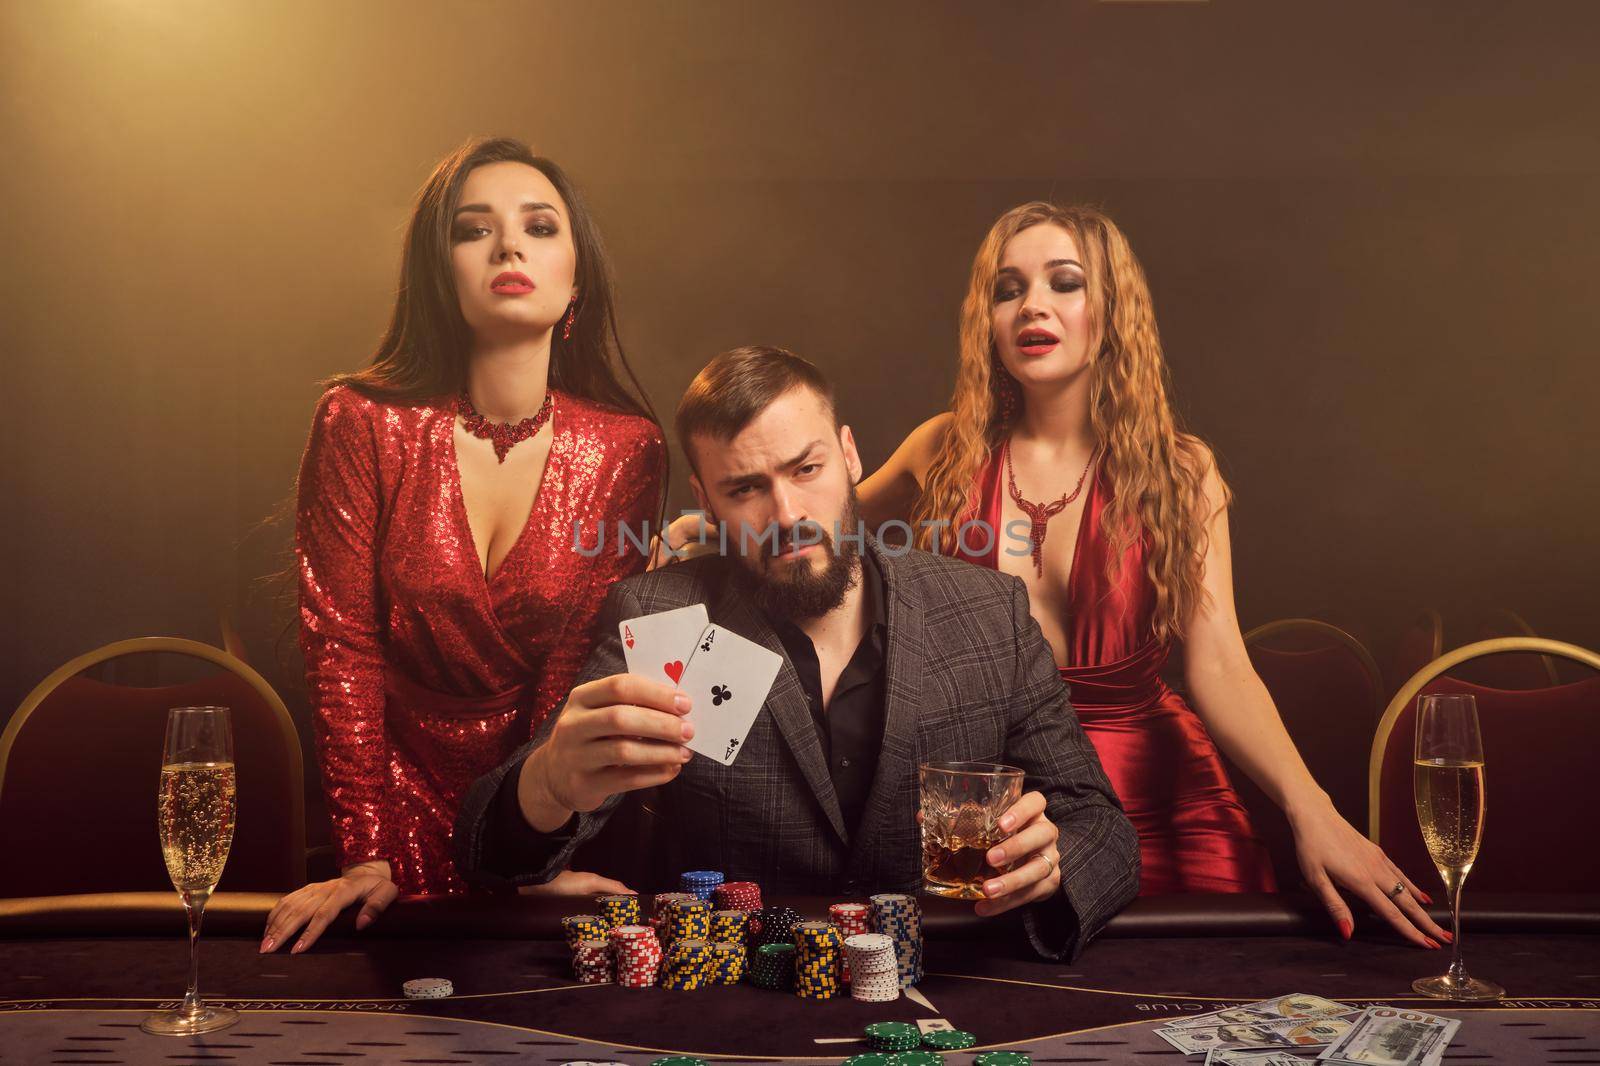 Two attractive women and good-looking man are playing poker at casino. They are showing the winning combination and looking at the camera while posing at the table against a yellow backlight on smoke background. Cards, chips, money, gambling, entertainment concept.